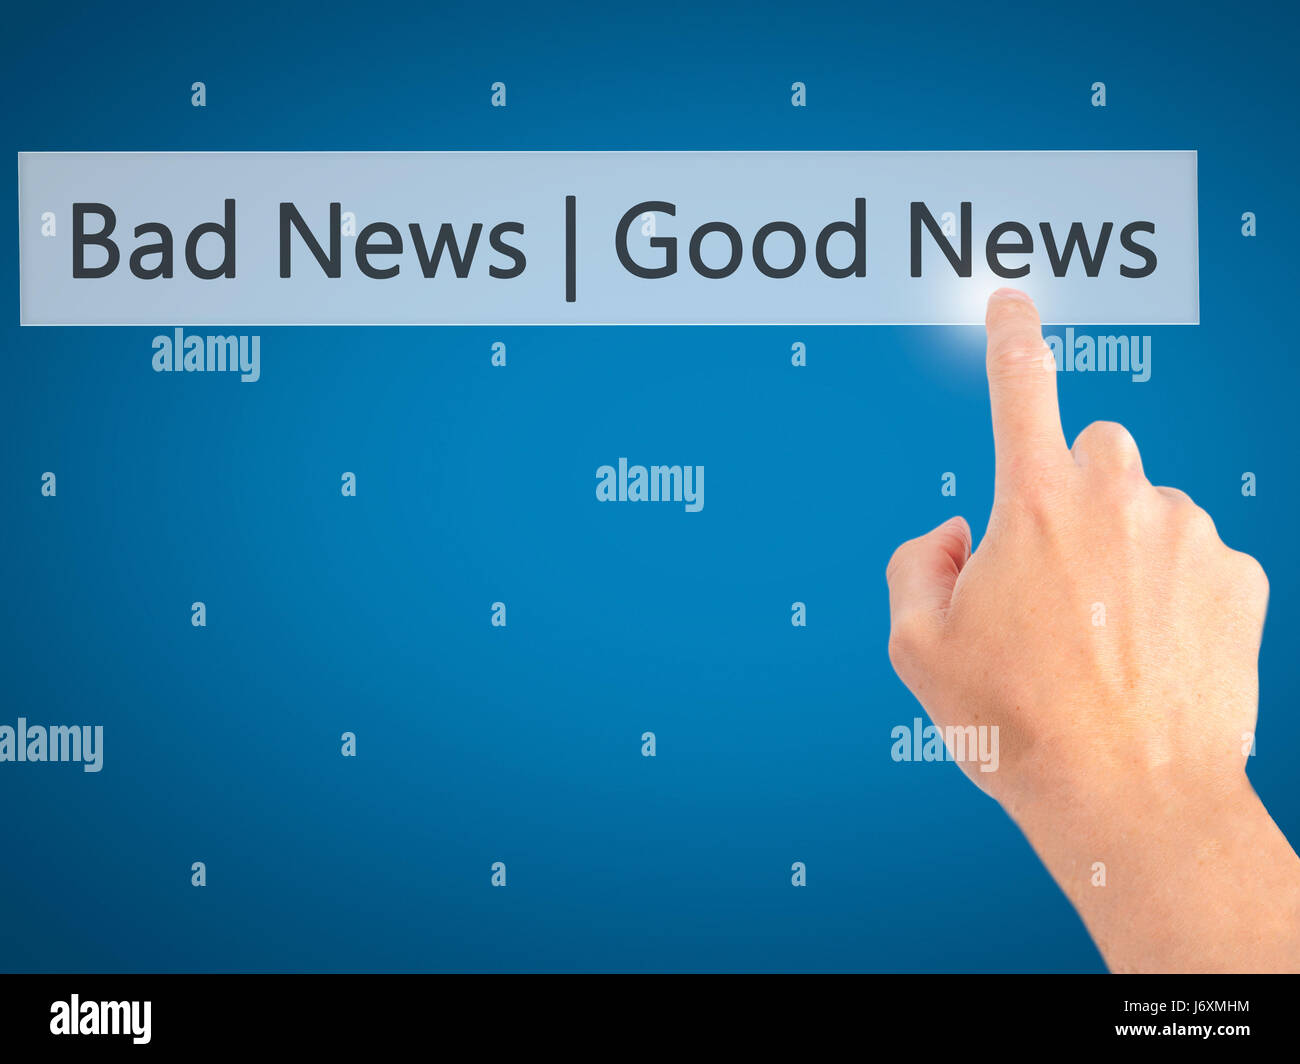 Good News Bad News - Hand pressing a button on blurred background concept . Business, technology, internet concept. Stock Photo Stock Photo